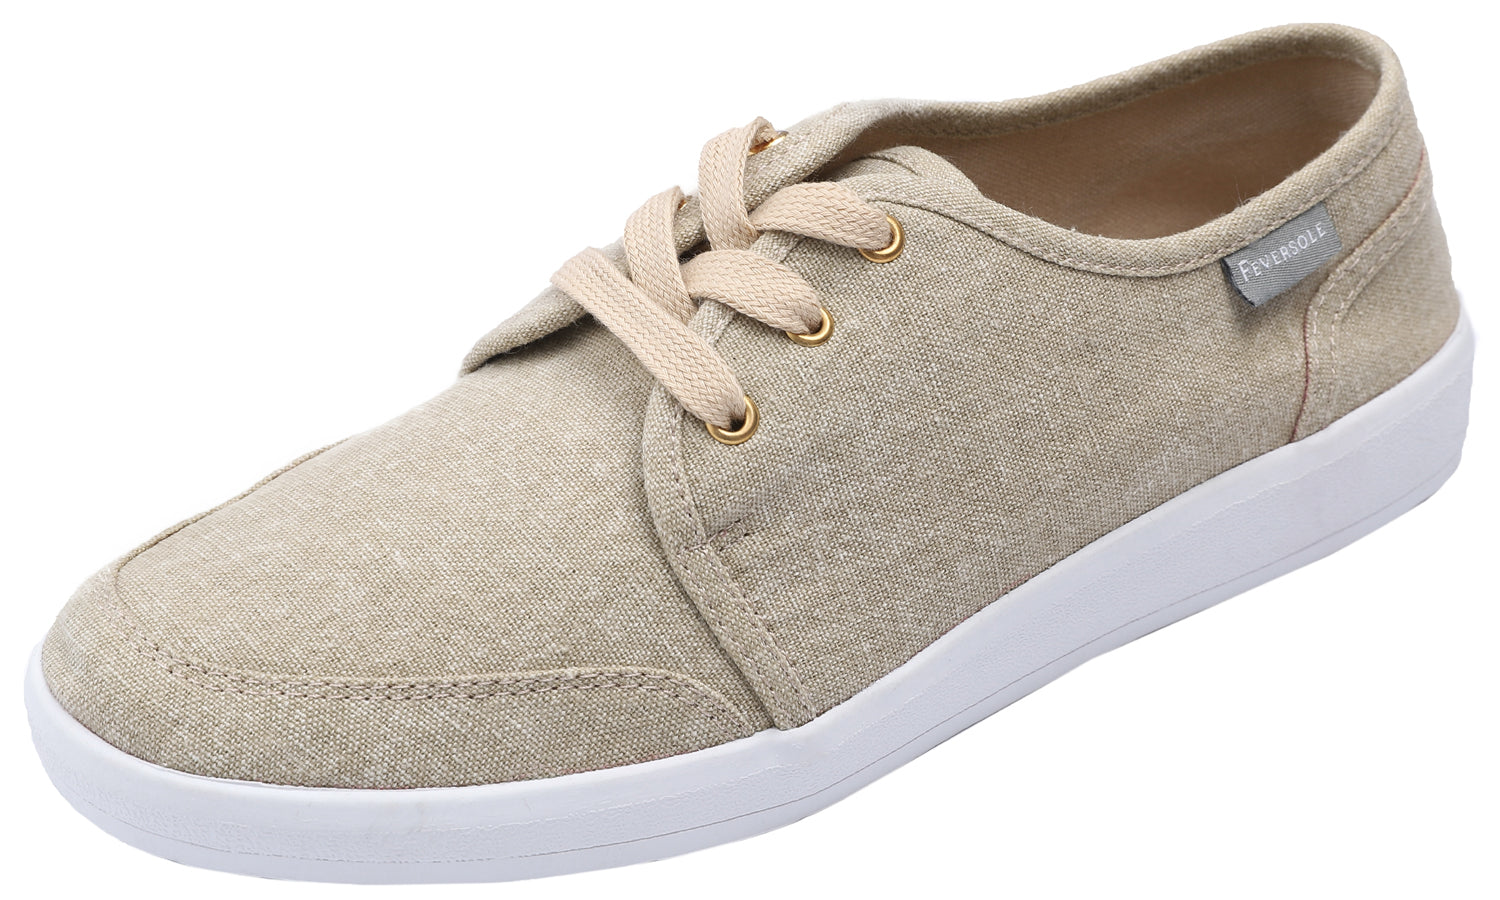 Feversole Comfort Women's Lace Up Lightweight Walking Shoes Casual Outfits Canvas Breathable Soft Flats Washed Beige